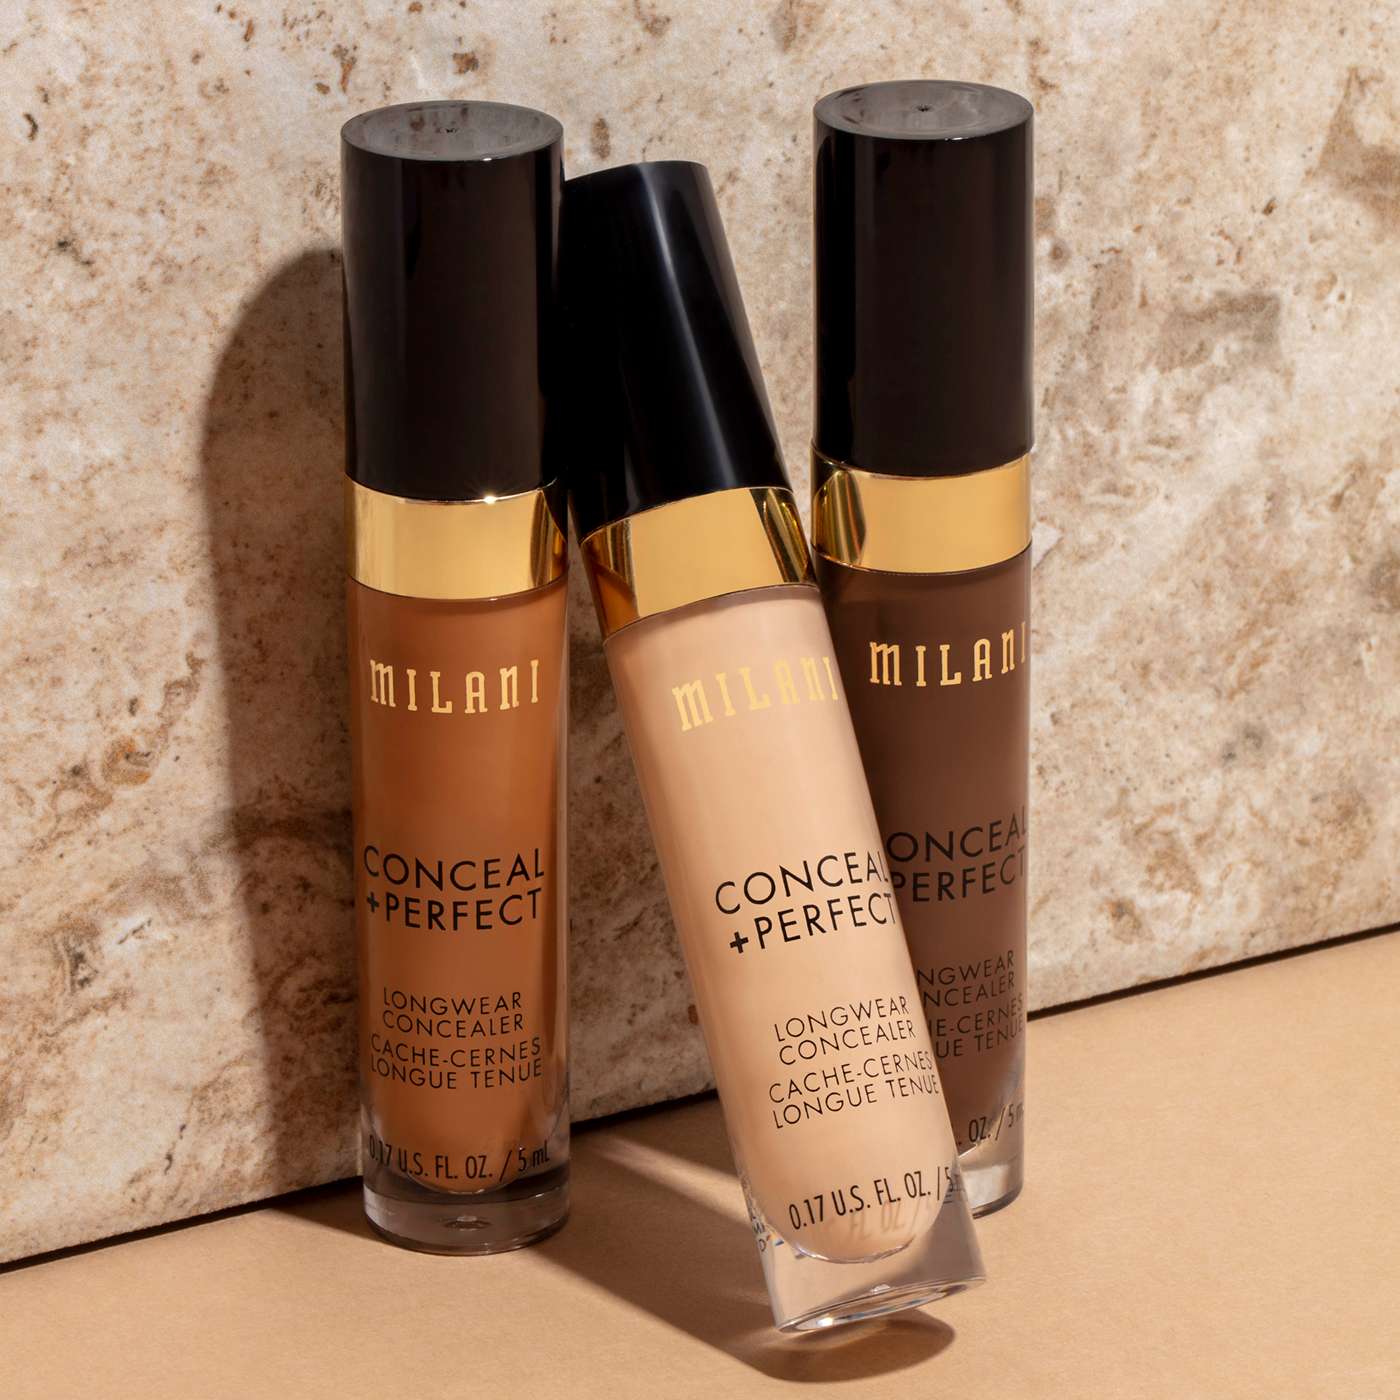 Milani Conceal +Perfect Longwear Concealer - Light Natural; image 4 of 6